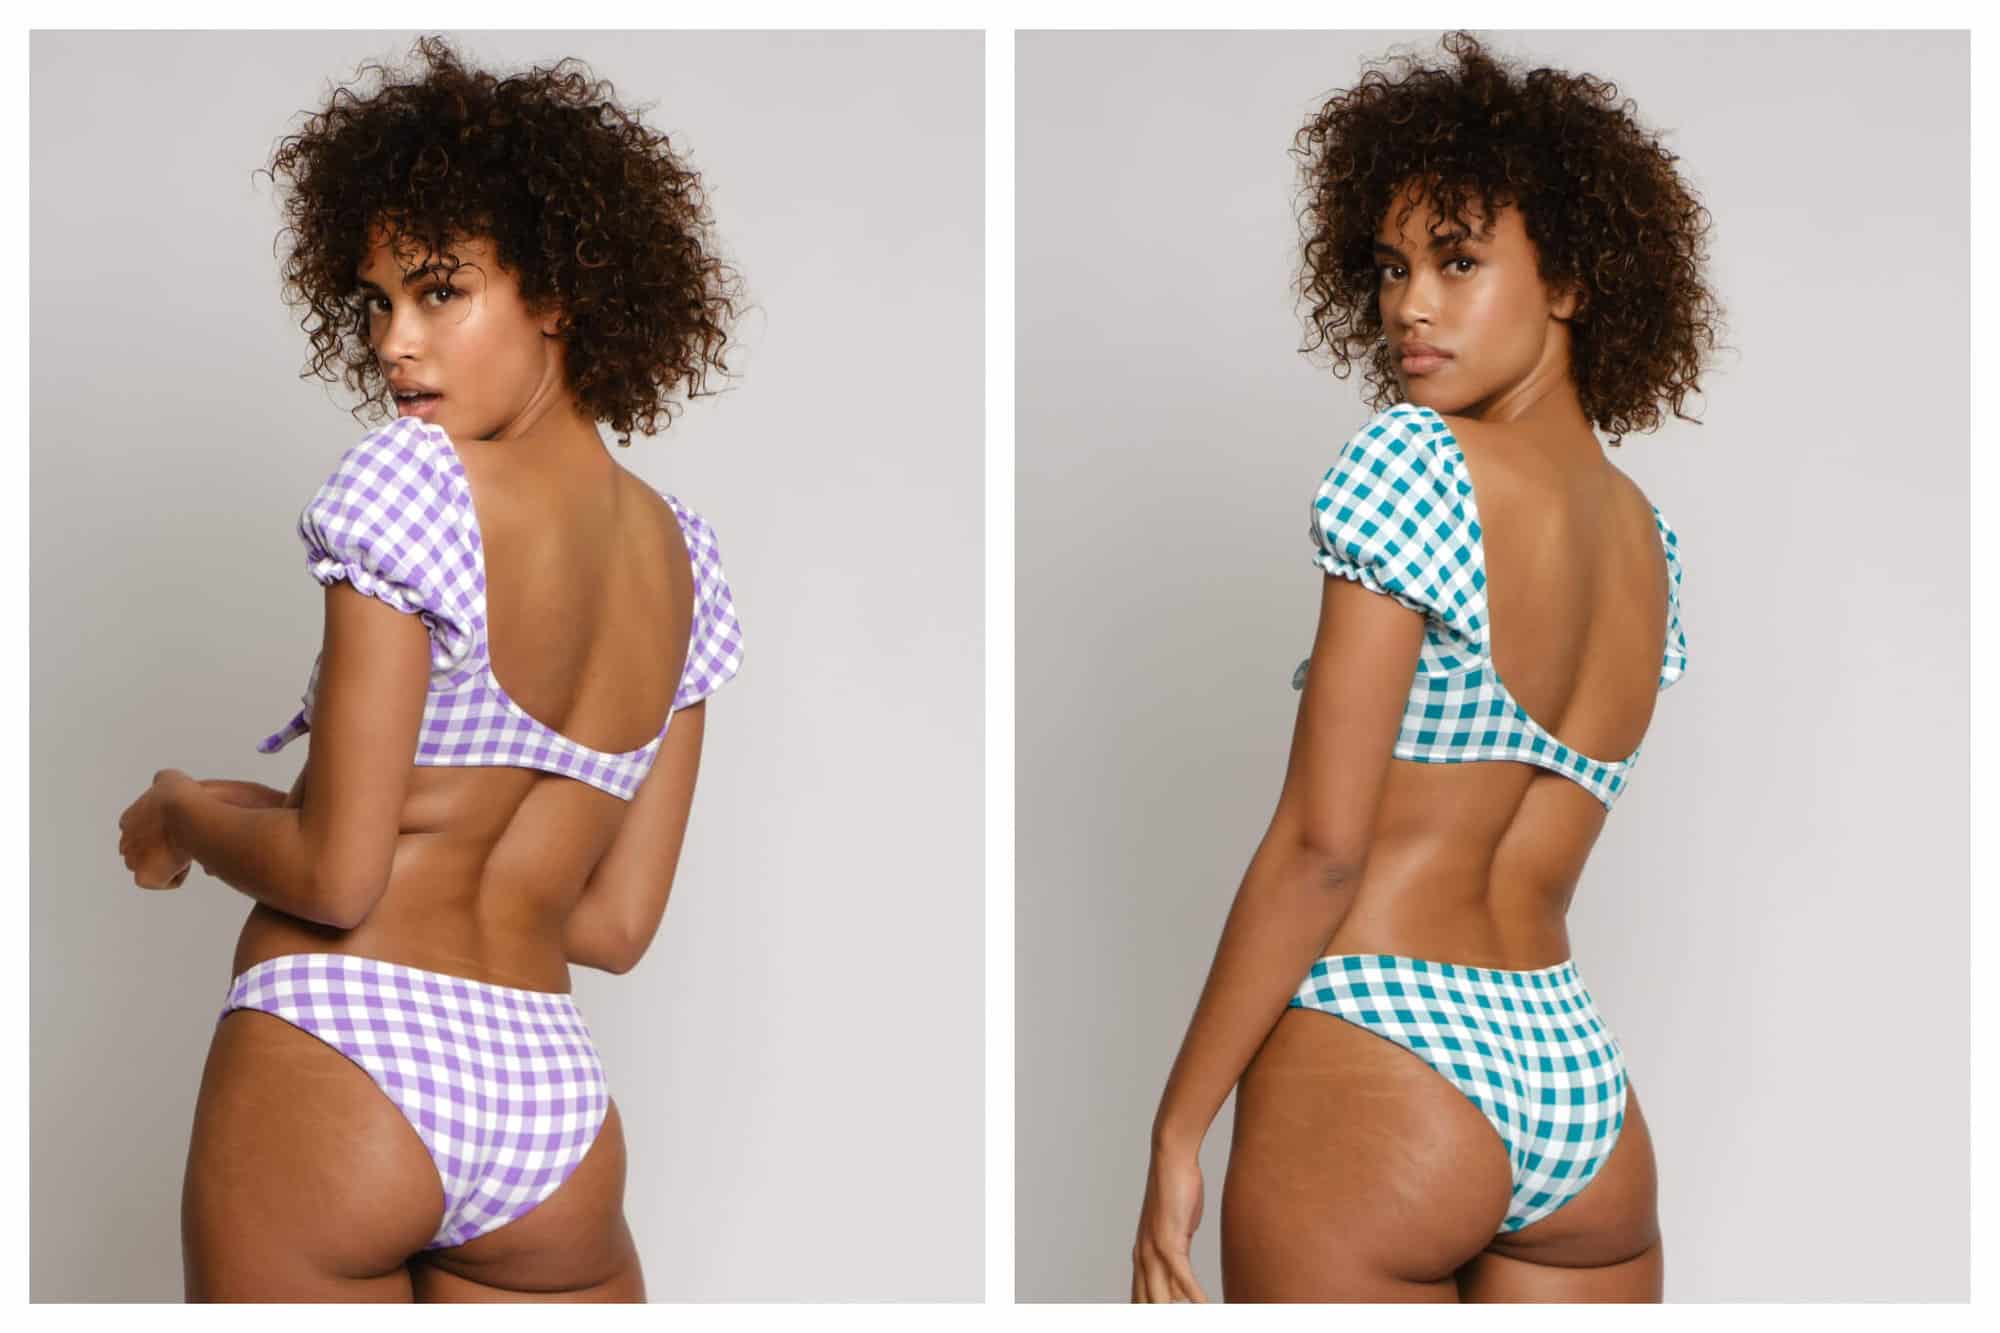 Two images of a model looking over her shoulder at the viewer wearing gingham bikini swimsuits by Leslie Amon, one purple and one green. 